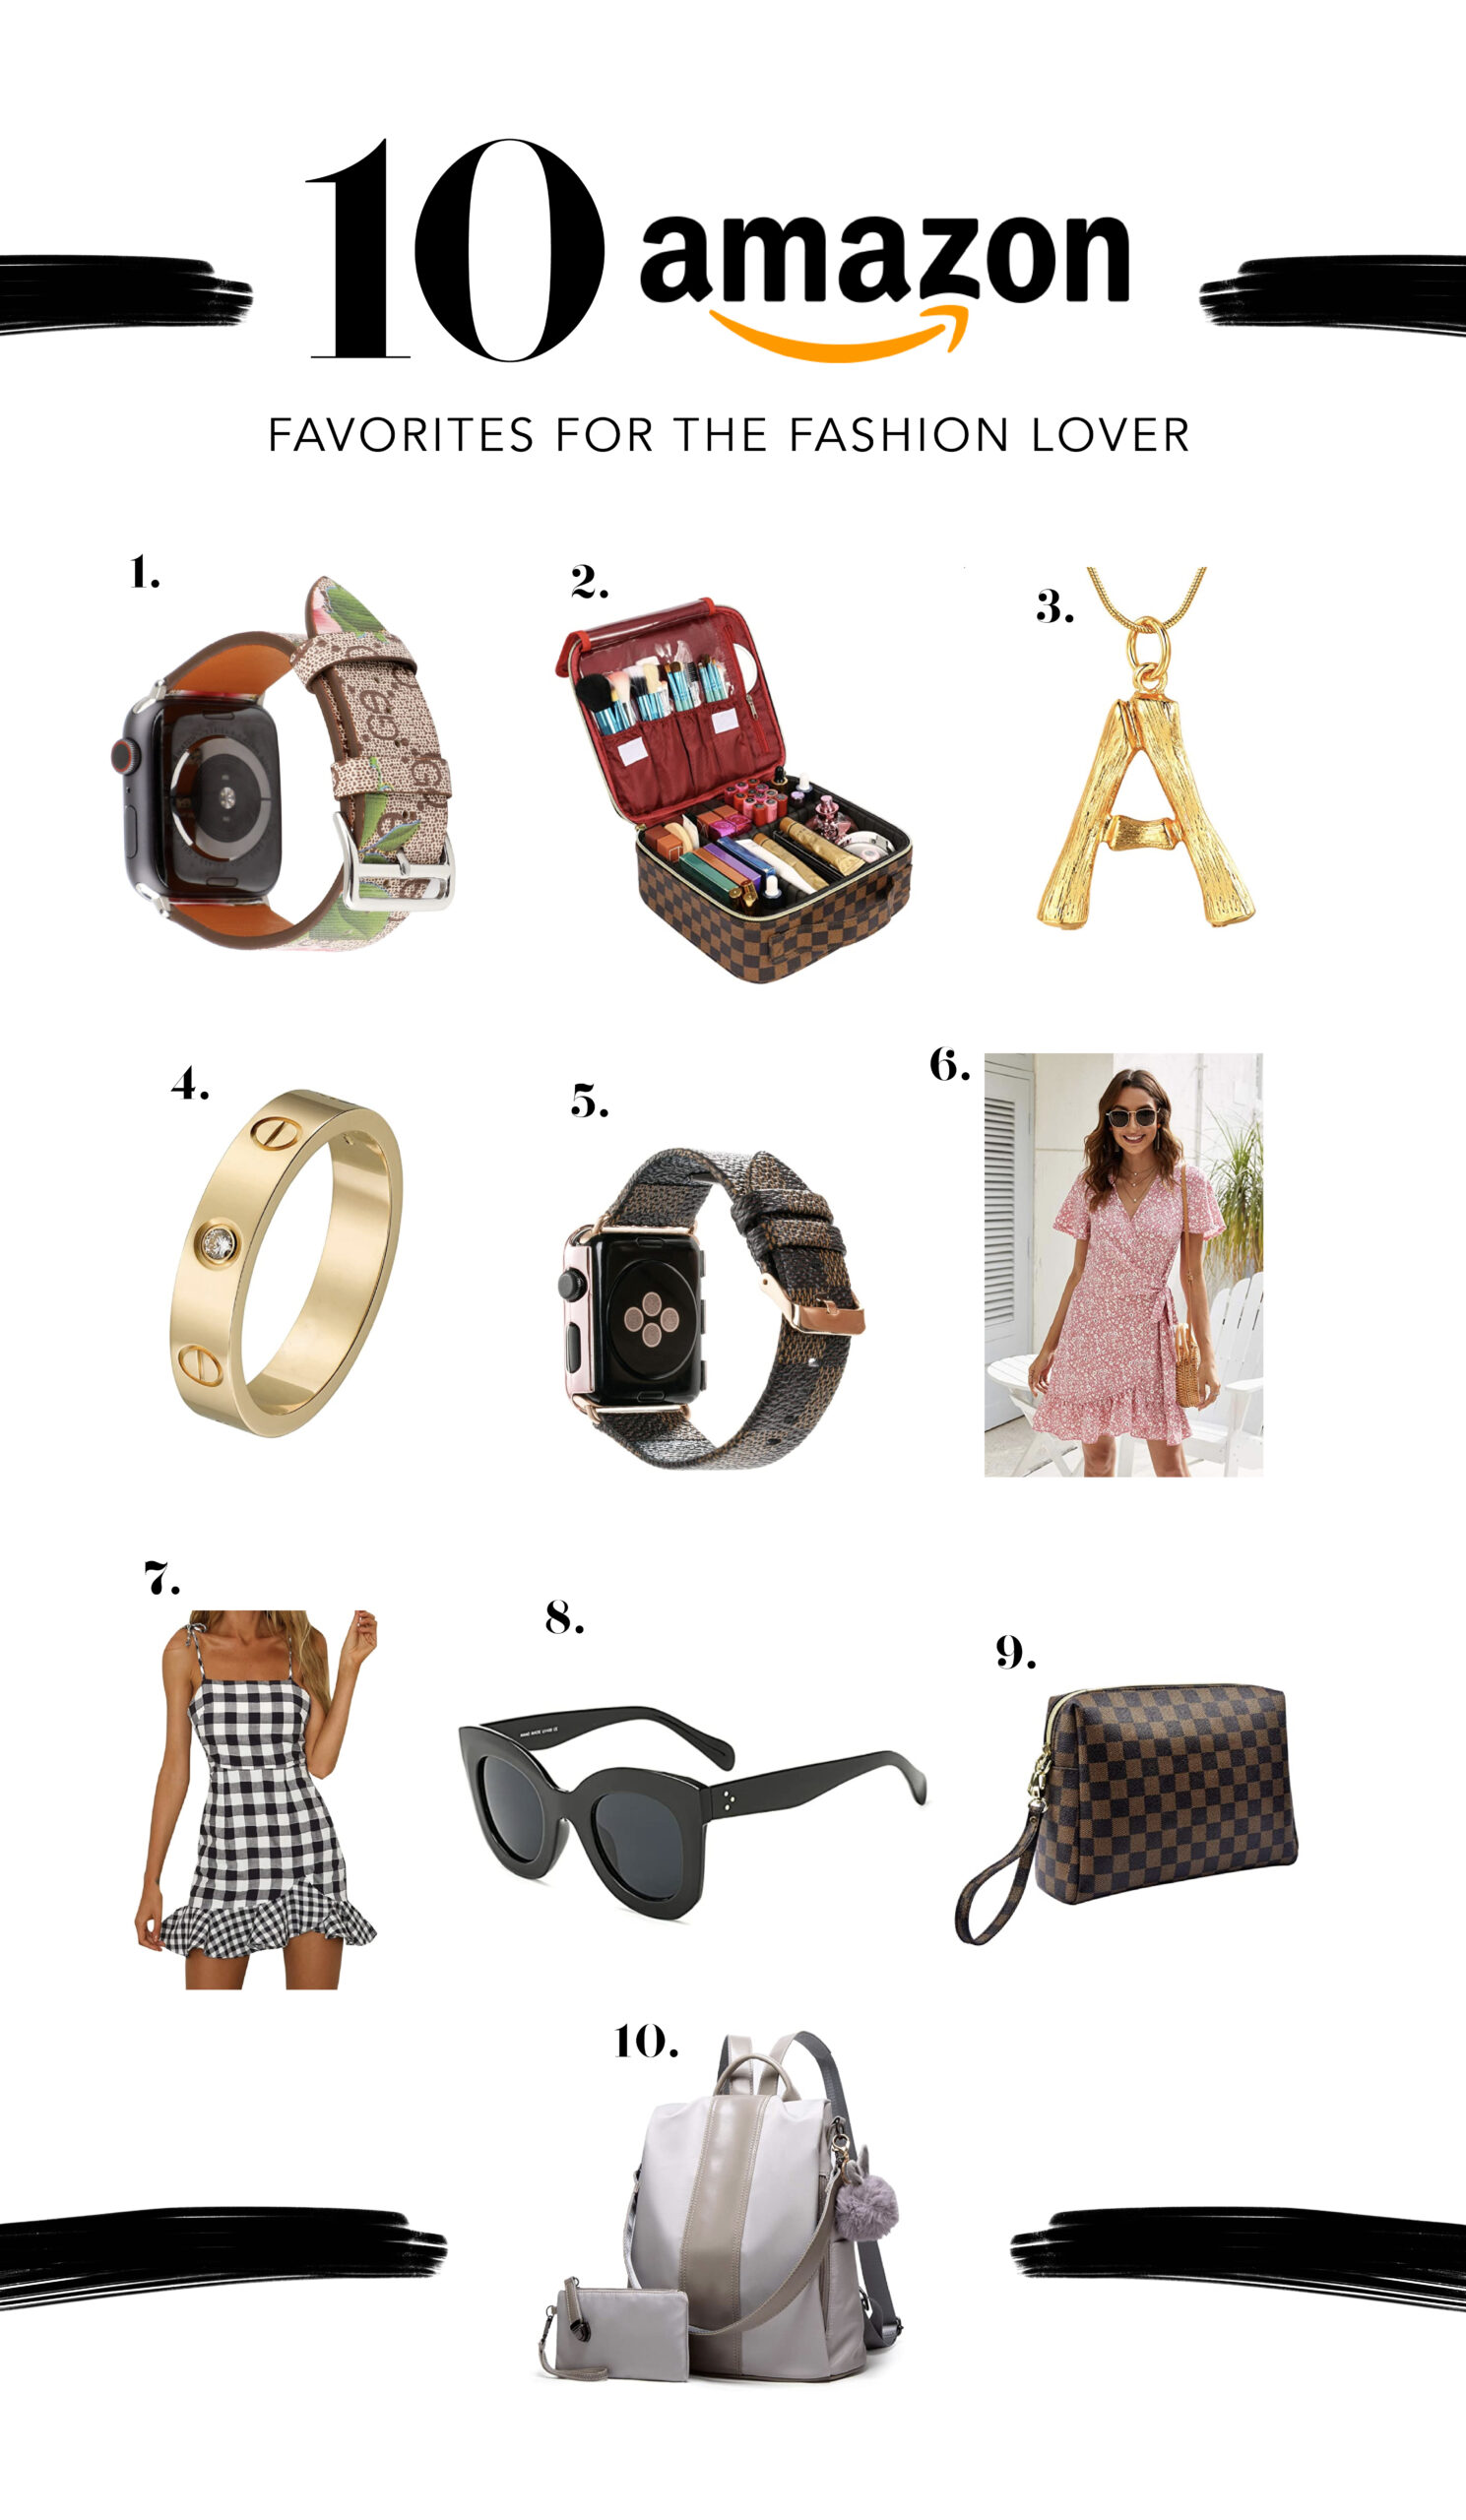 10 amazon faves for fashion lover